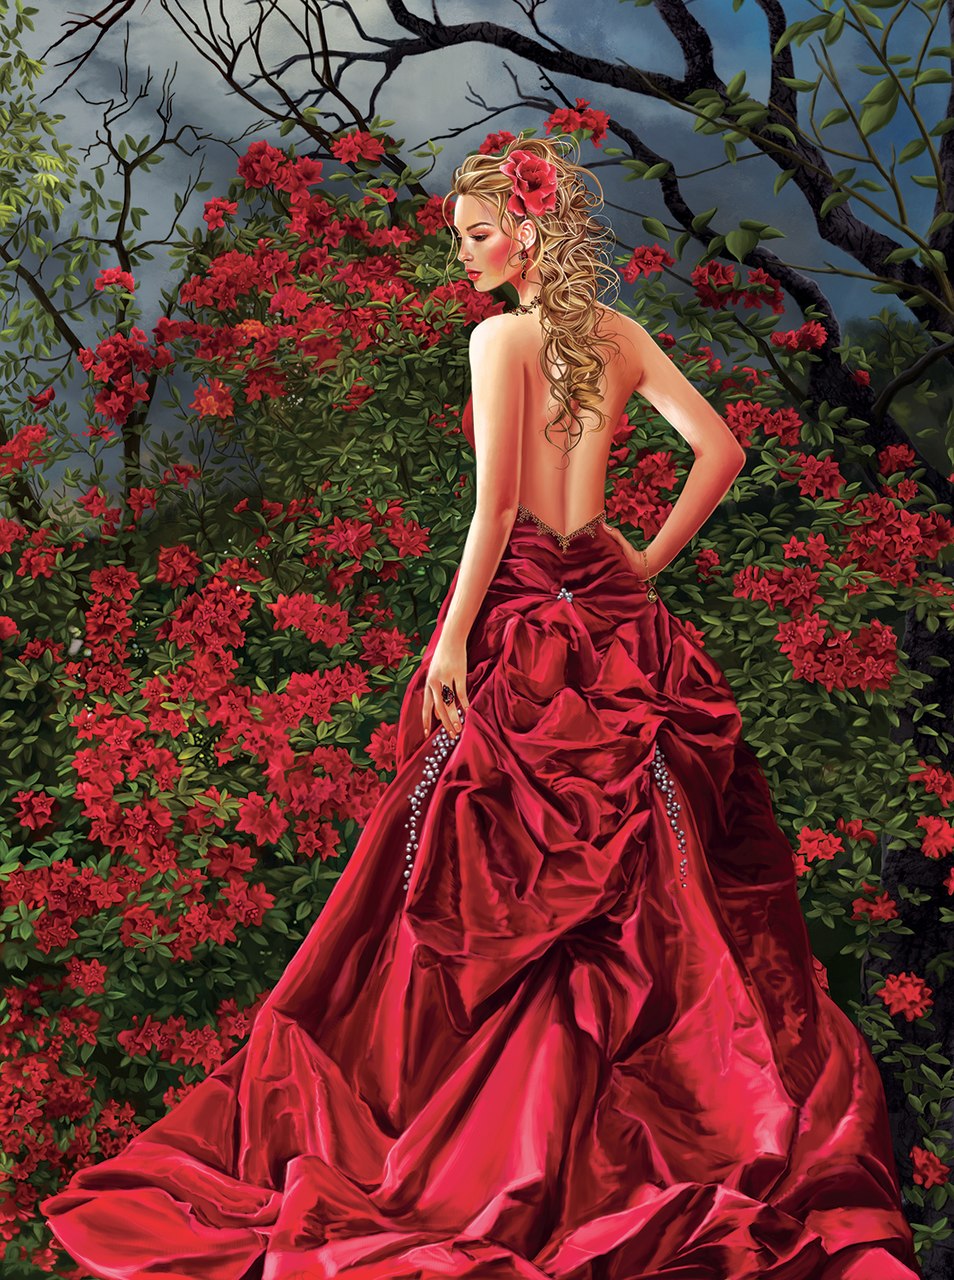 Tais in Red - 1000pc Jigsaw Puzzle By Sunsout  			  					NEW